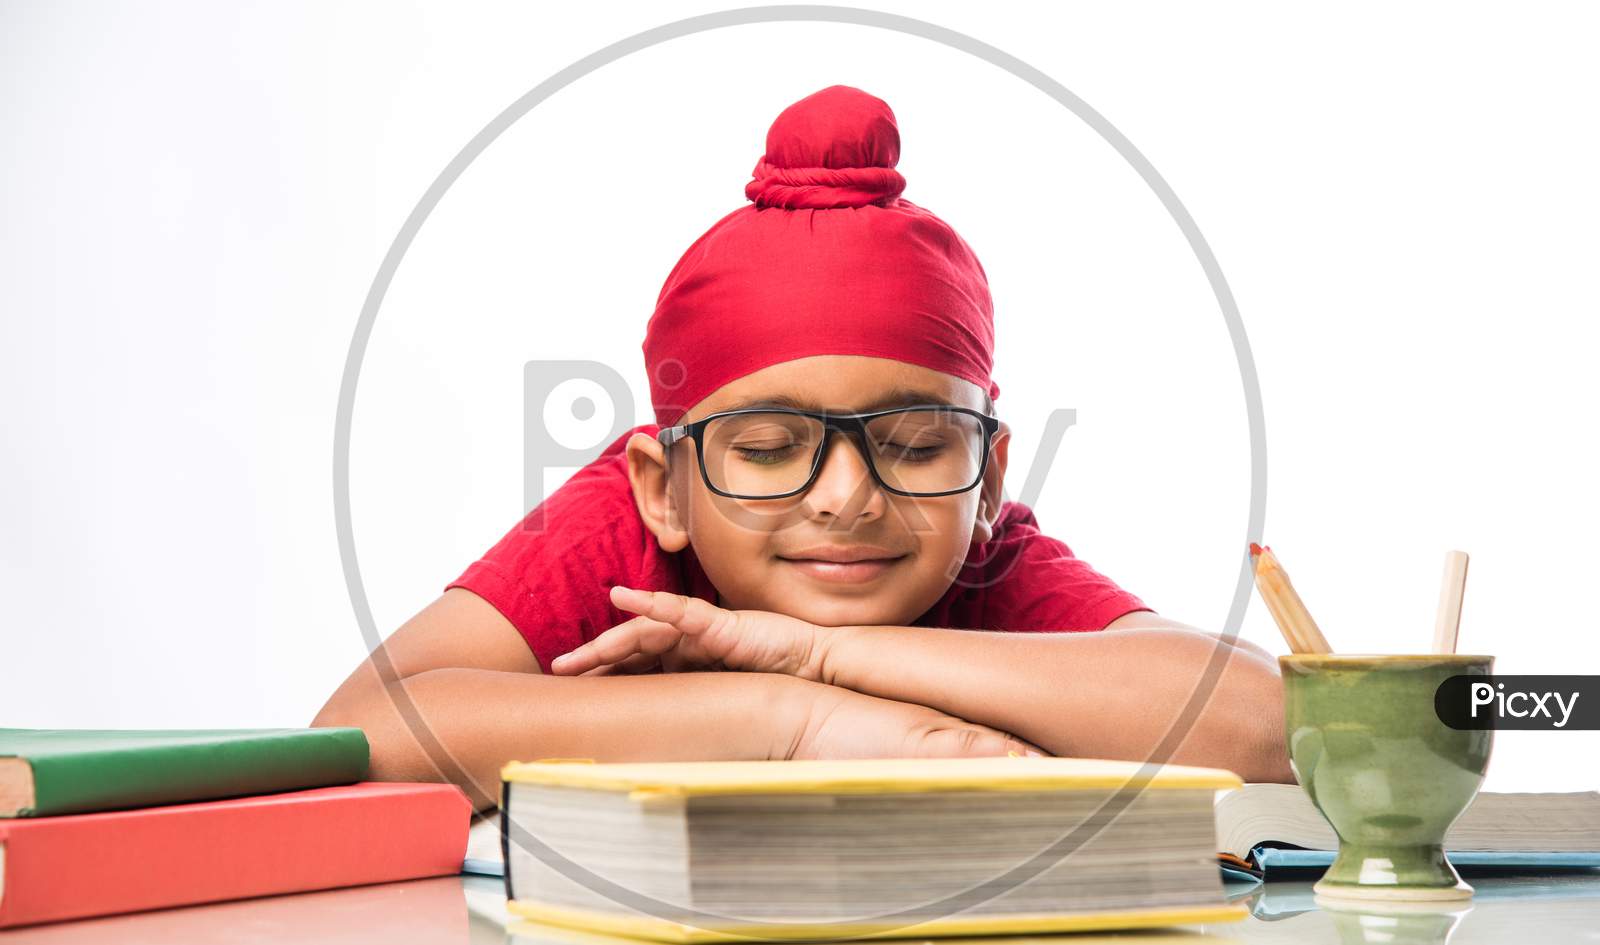 Indian Sikh/punjabi little boy studying with books at study table